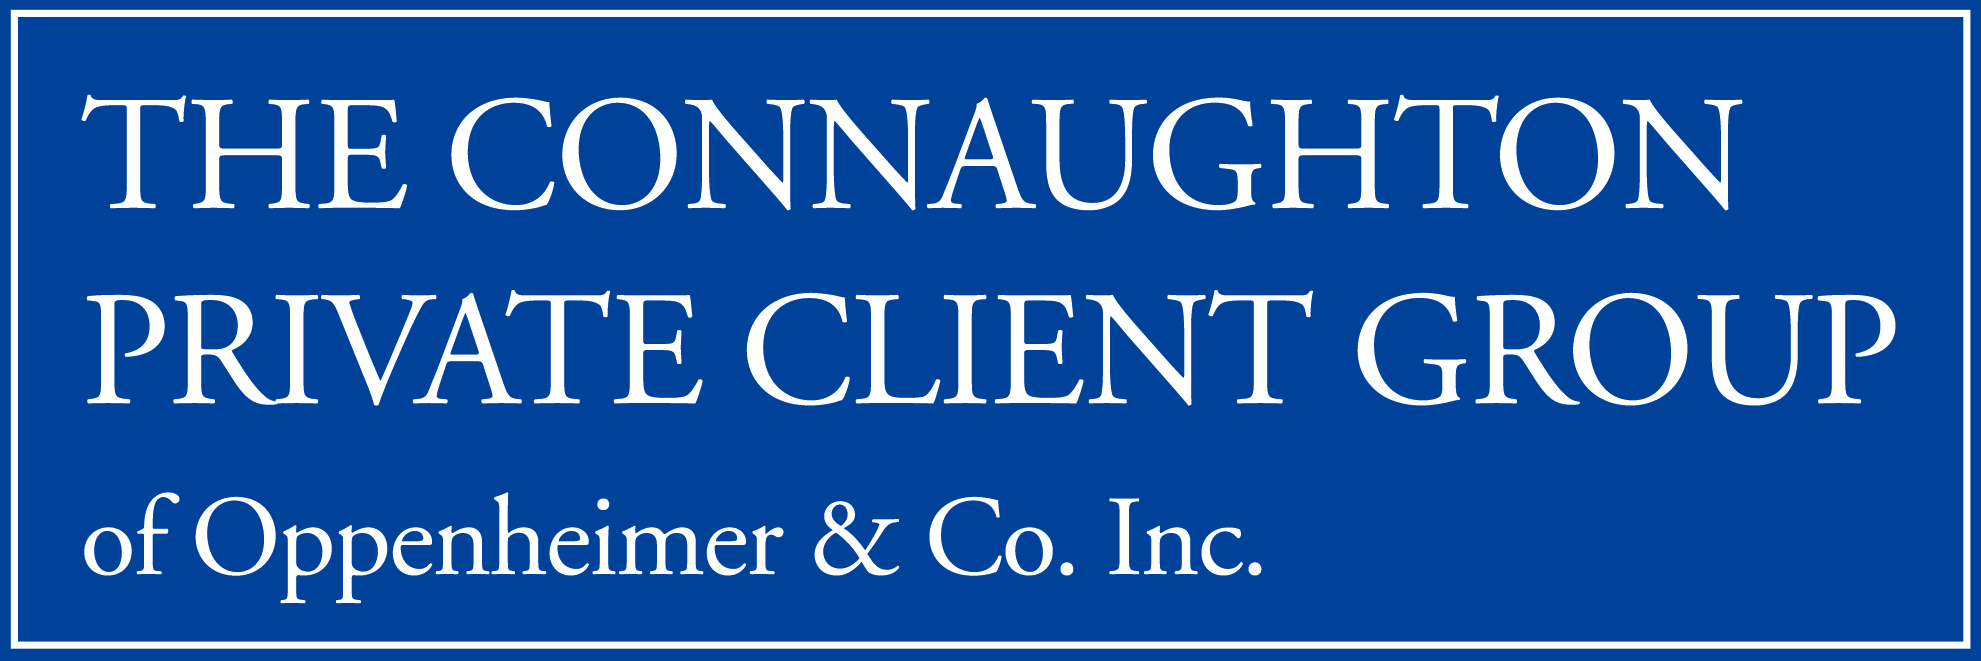 The Connaughton Private Client Group | Oppenheimer & Co. Inc.